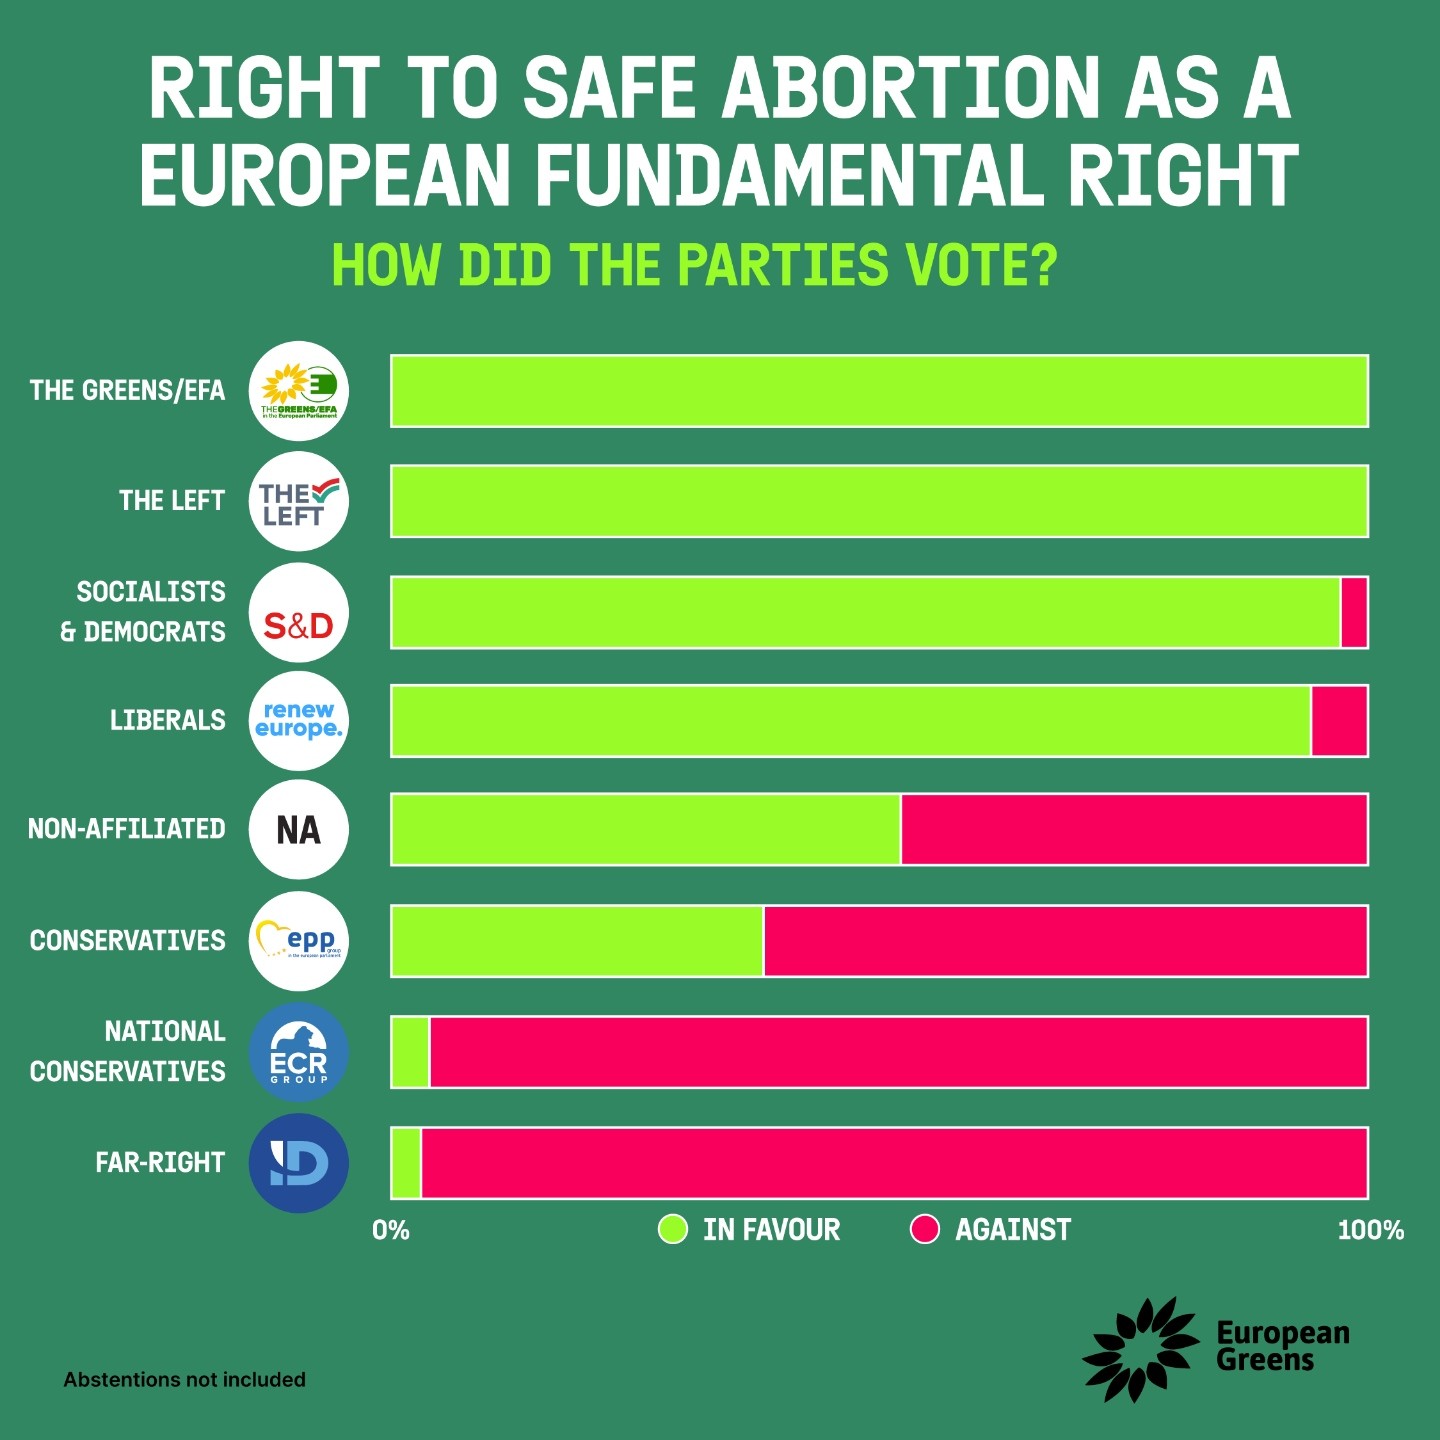 Right to safe abortion as a European fundamental right: how did the parties vote  The Greens/EFA: 100% in favour The Left: 100% in favour Socialists & Democrats: 97% in favour, 3% against Liberals (Renew Europe): 95% in favour; 5% against Non-Affiliated: 52% in favour, 48% against Conservatives (EPP): 40% in favour, 60% against National conservatives (ECR): 5% in favour, 95% against Far right: 3% in favour, 97% against  Abstention not included. Graph by European Greens